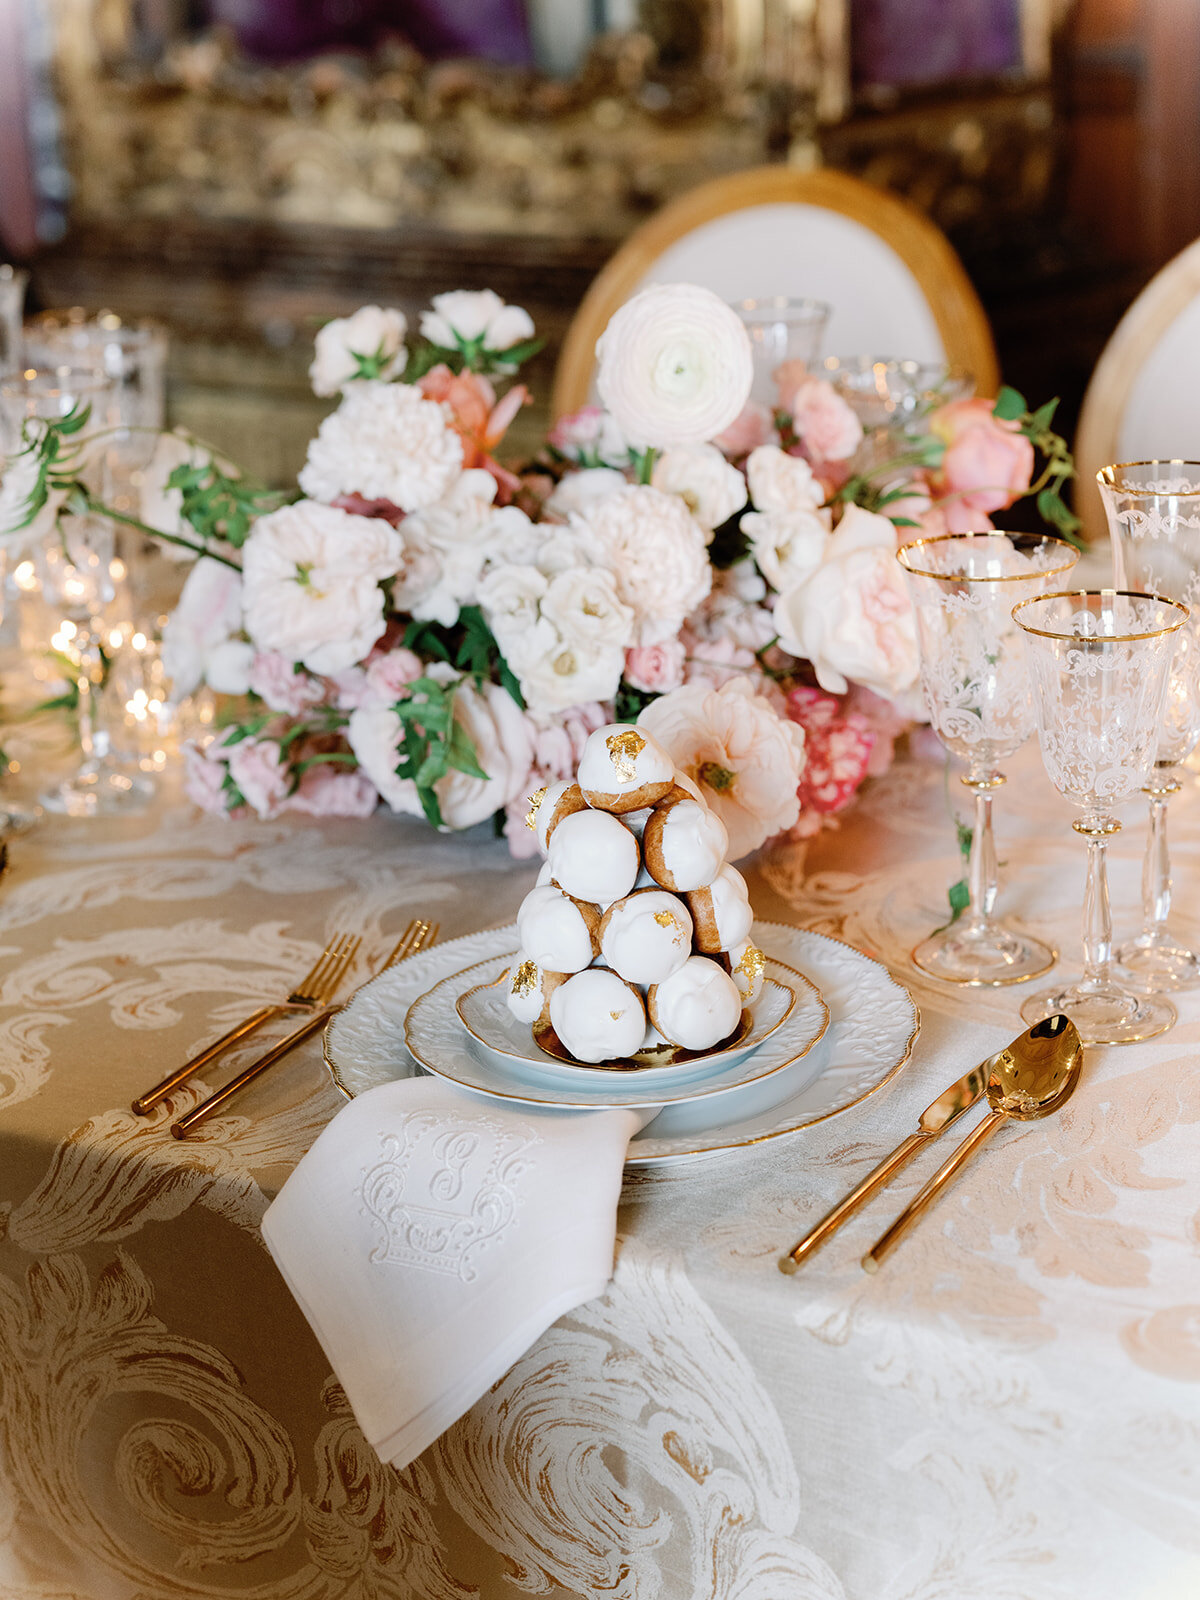 A classic and lavish wedding table setting with blush and gold touches